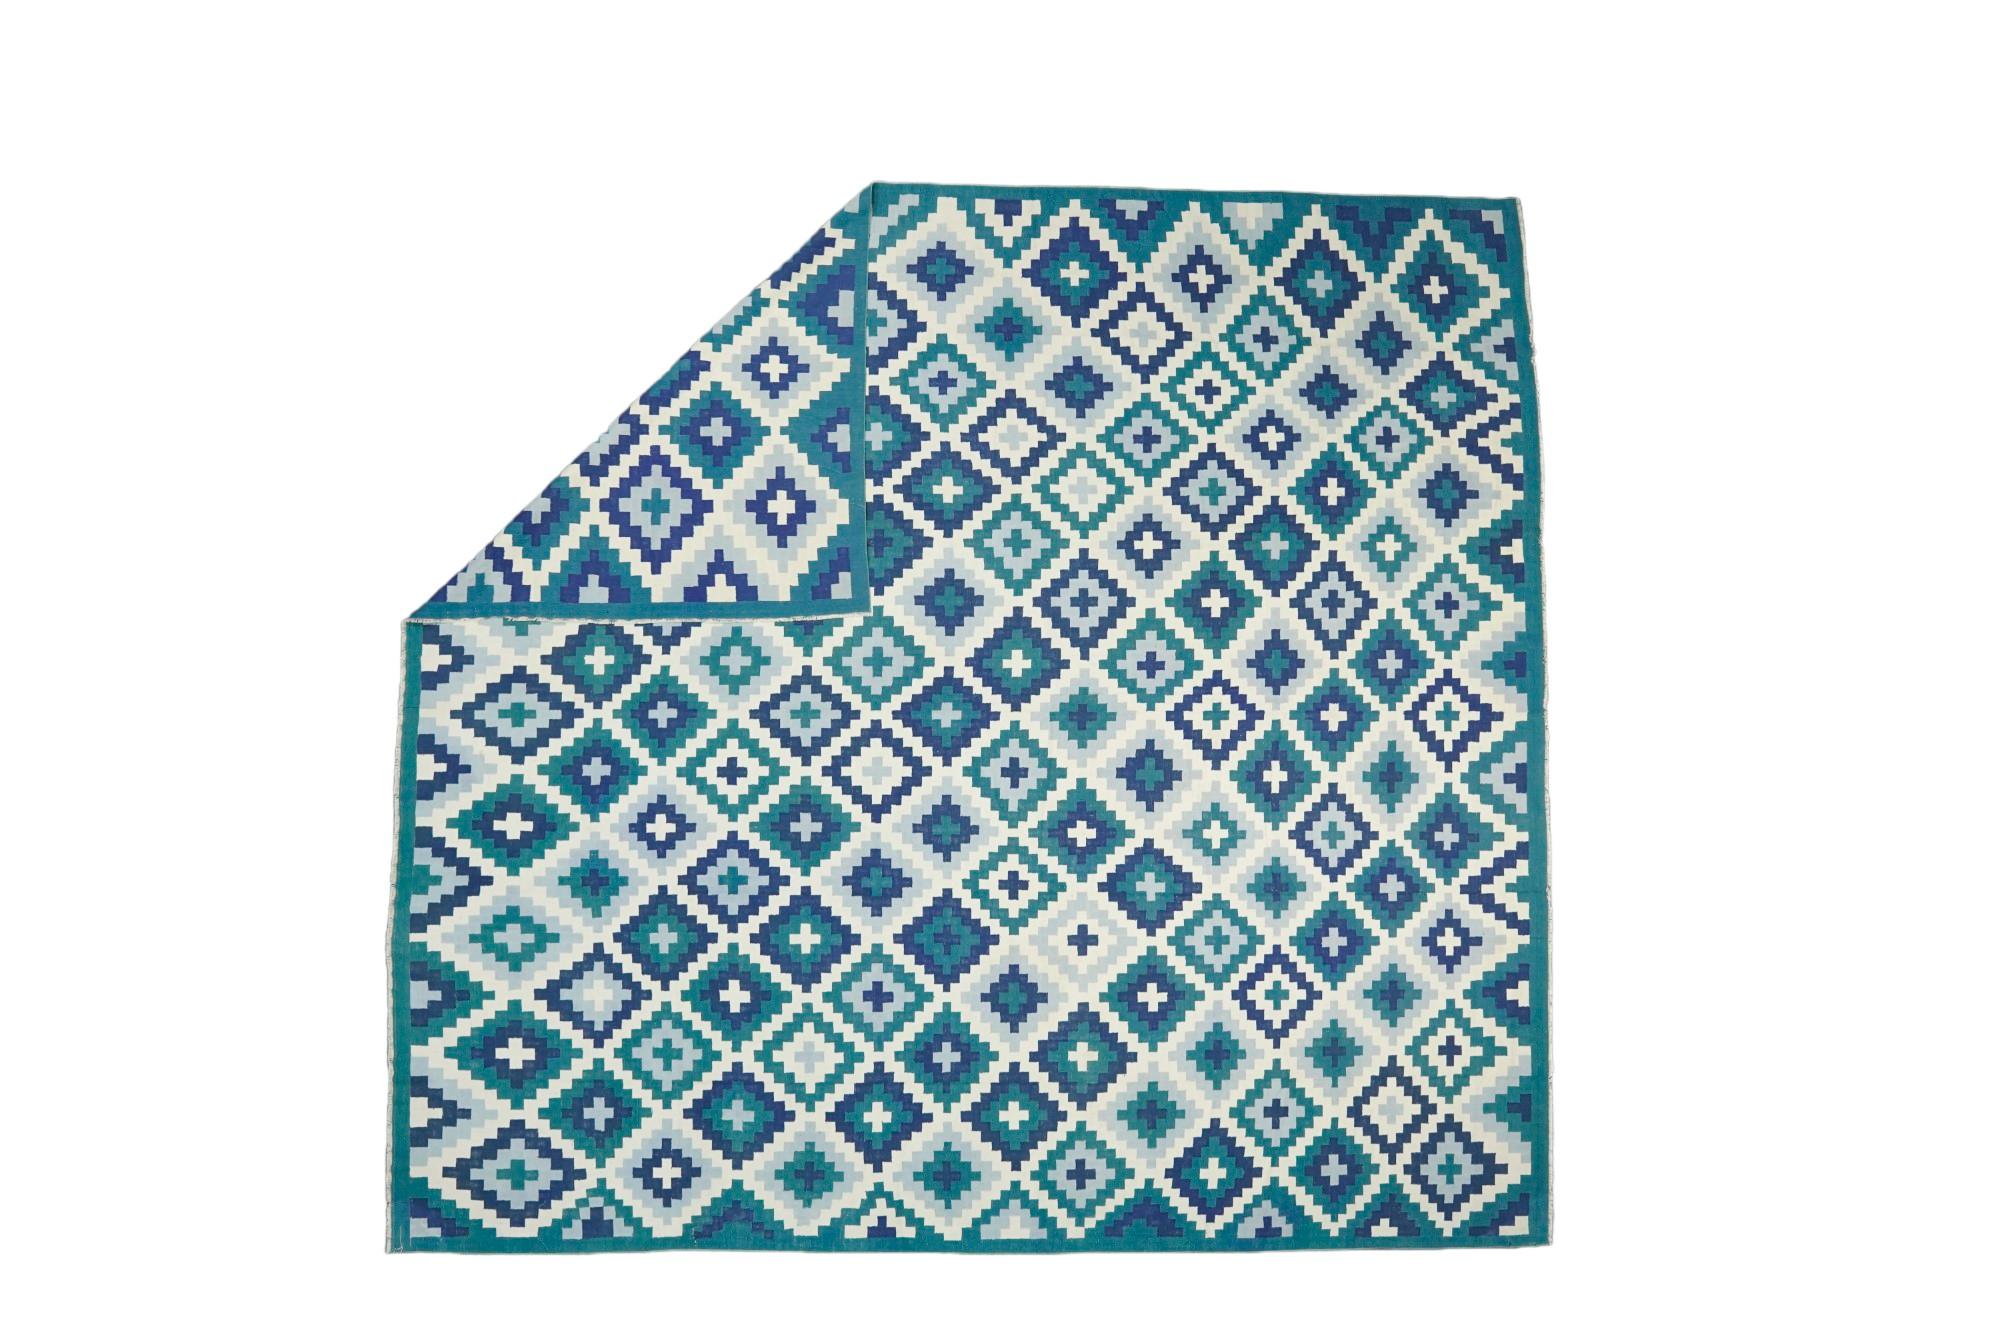 This 11x11 rug is a rare vintage Dhurrie rug from an exciting new mid-century curation by Rug & Kilim. Handwoven in a wool flatweave, it originates from India circa 1950-1960, and enjoys white and teal jewel tones in an all over geometric pattern.